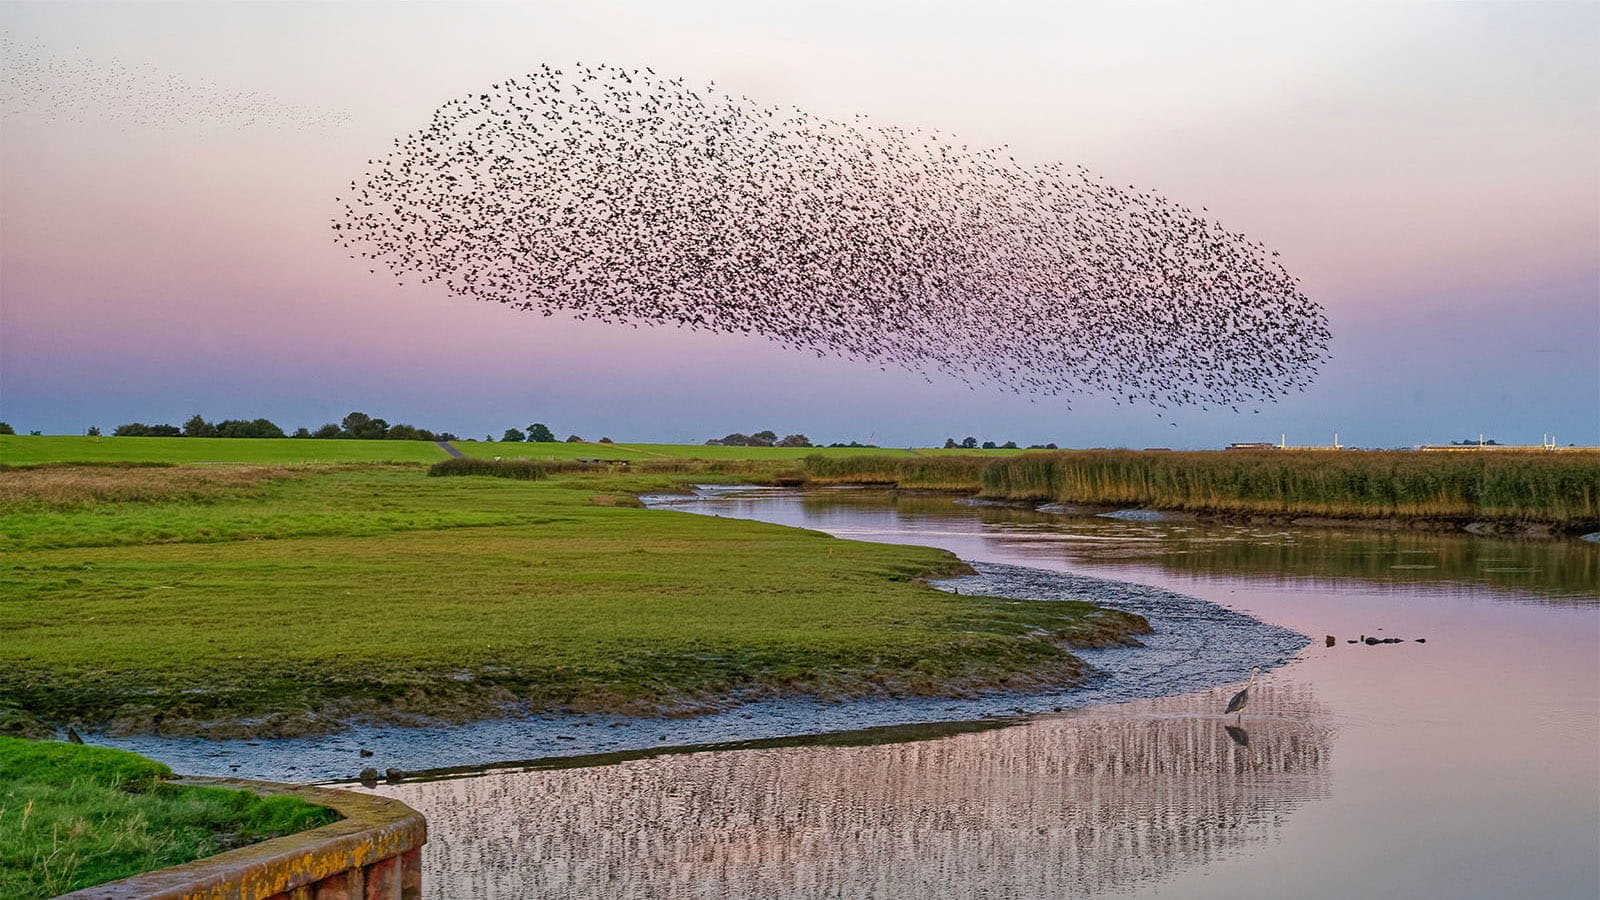 large swarm of birds flying above green fields and river reflecting a purple sky